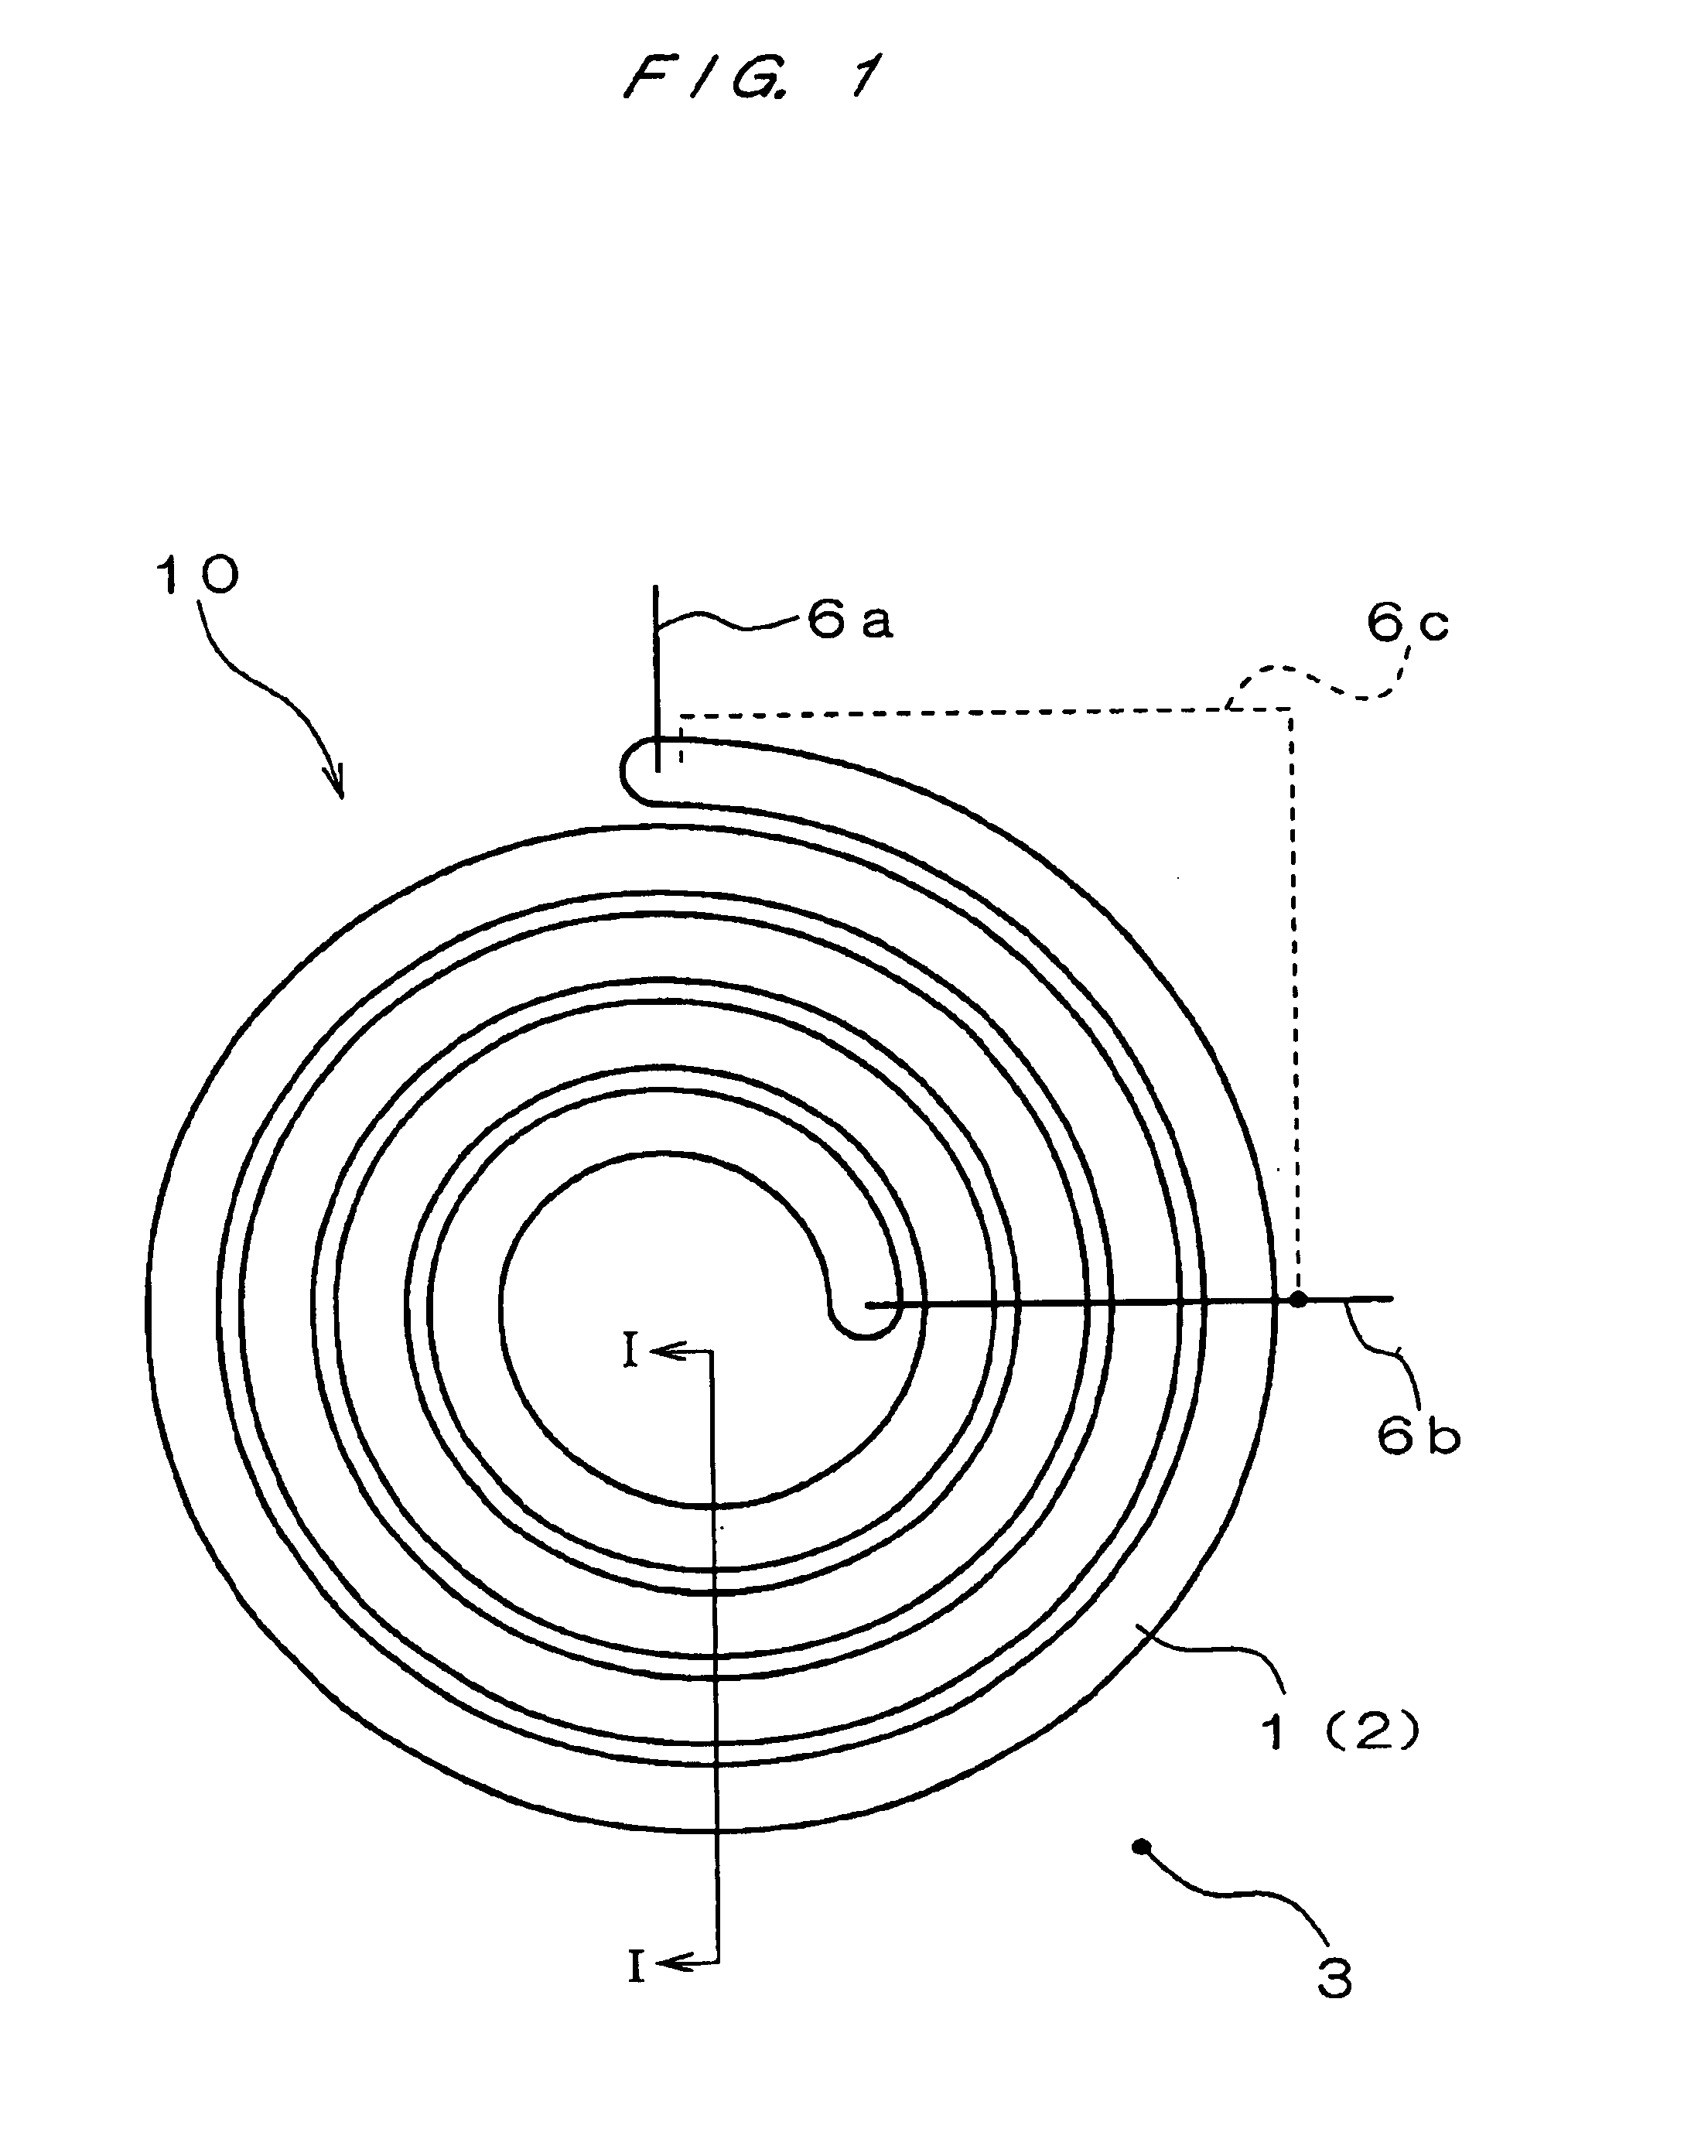 Inductor element